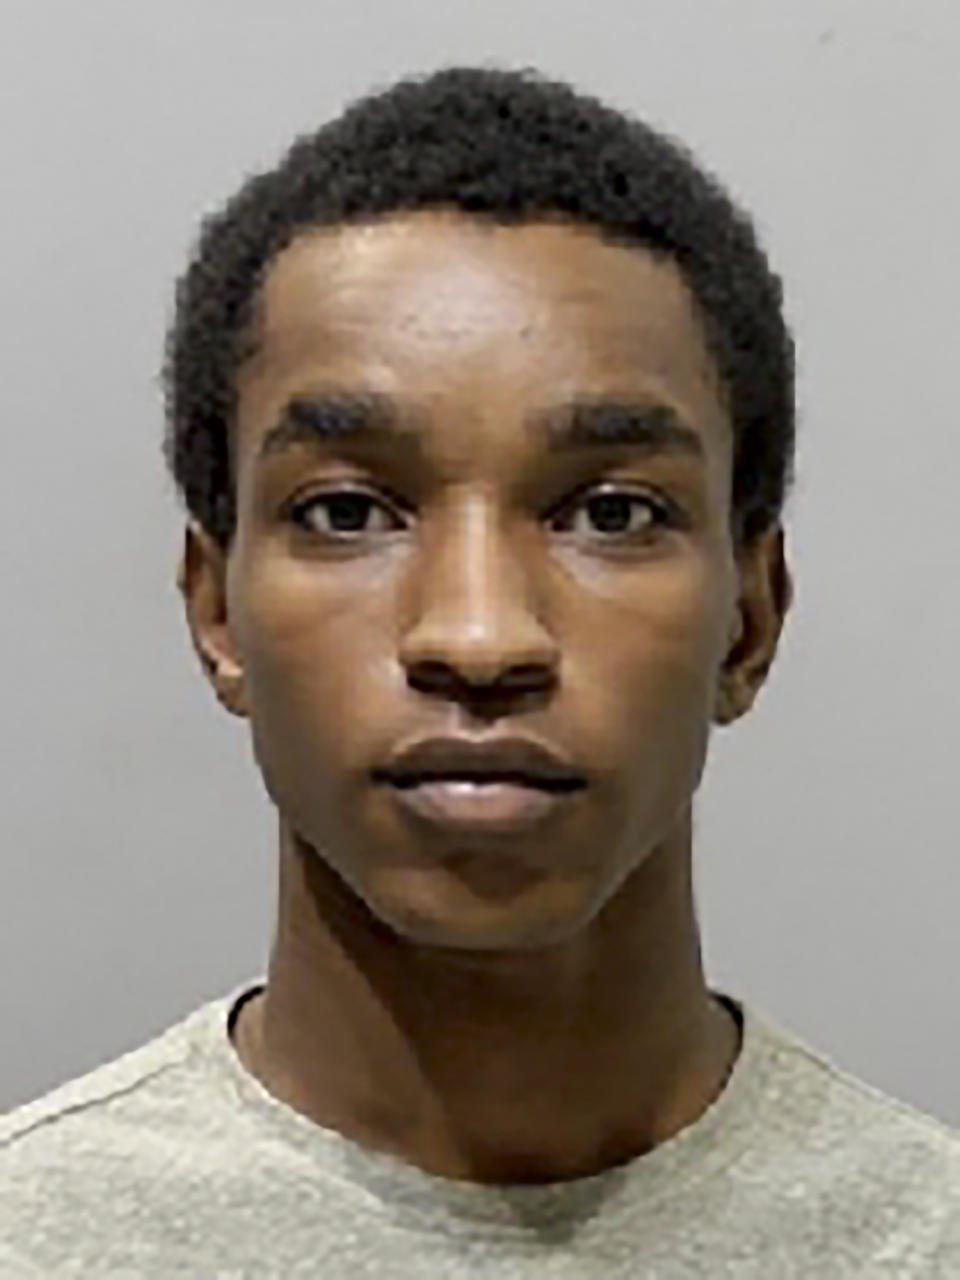 In this undated photo provided by the Detroit Police Department, Dontae Ramon Smith is pictured. The 19-year-old man has been charged Wednesday, Aug. 31, 2022, with first-degree murder in a series of apparently random shootings in Detroit that left three people dead and a fourth wounded on Aug. 28. (Detroit Police Department via AP)